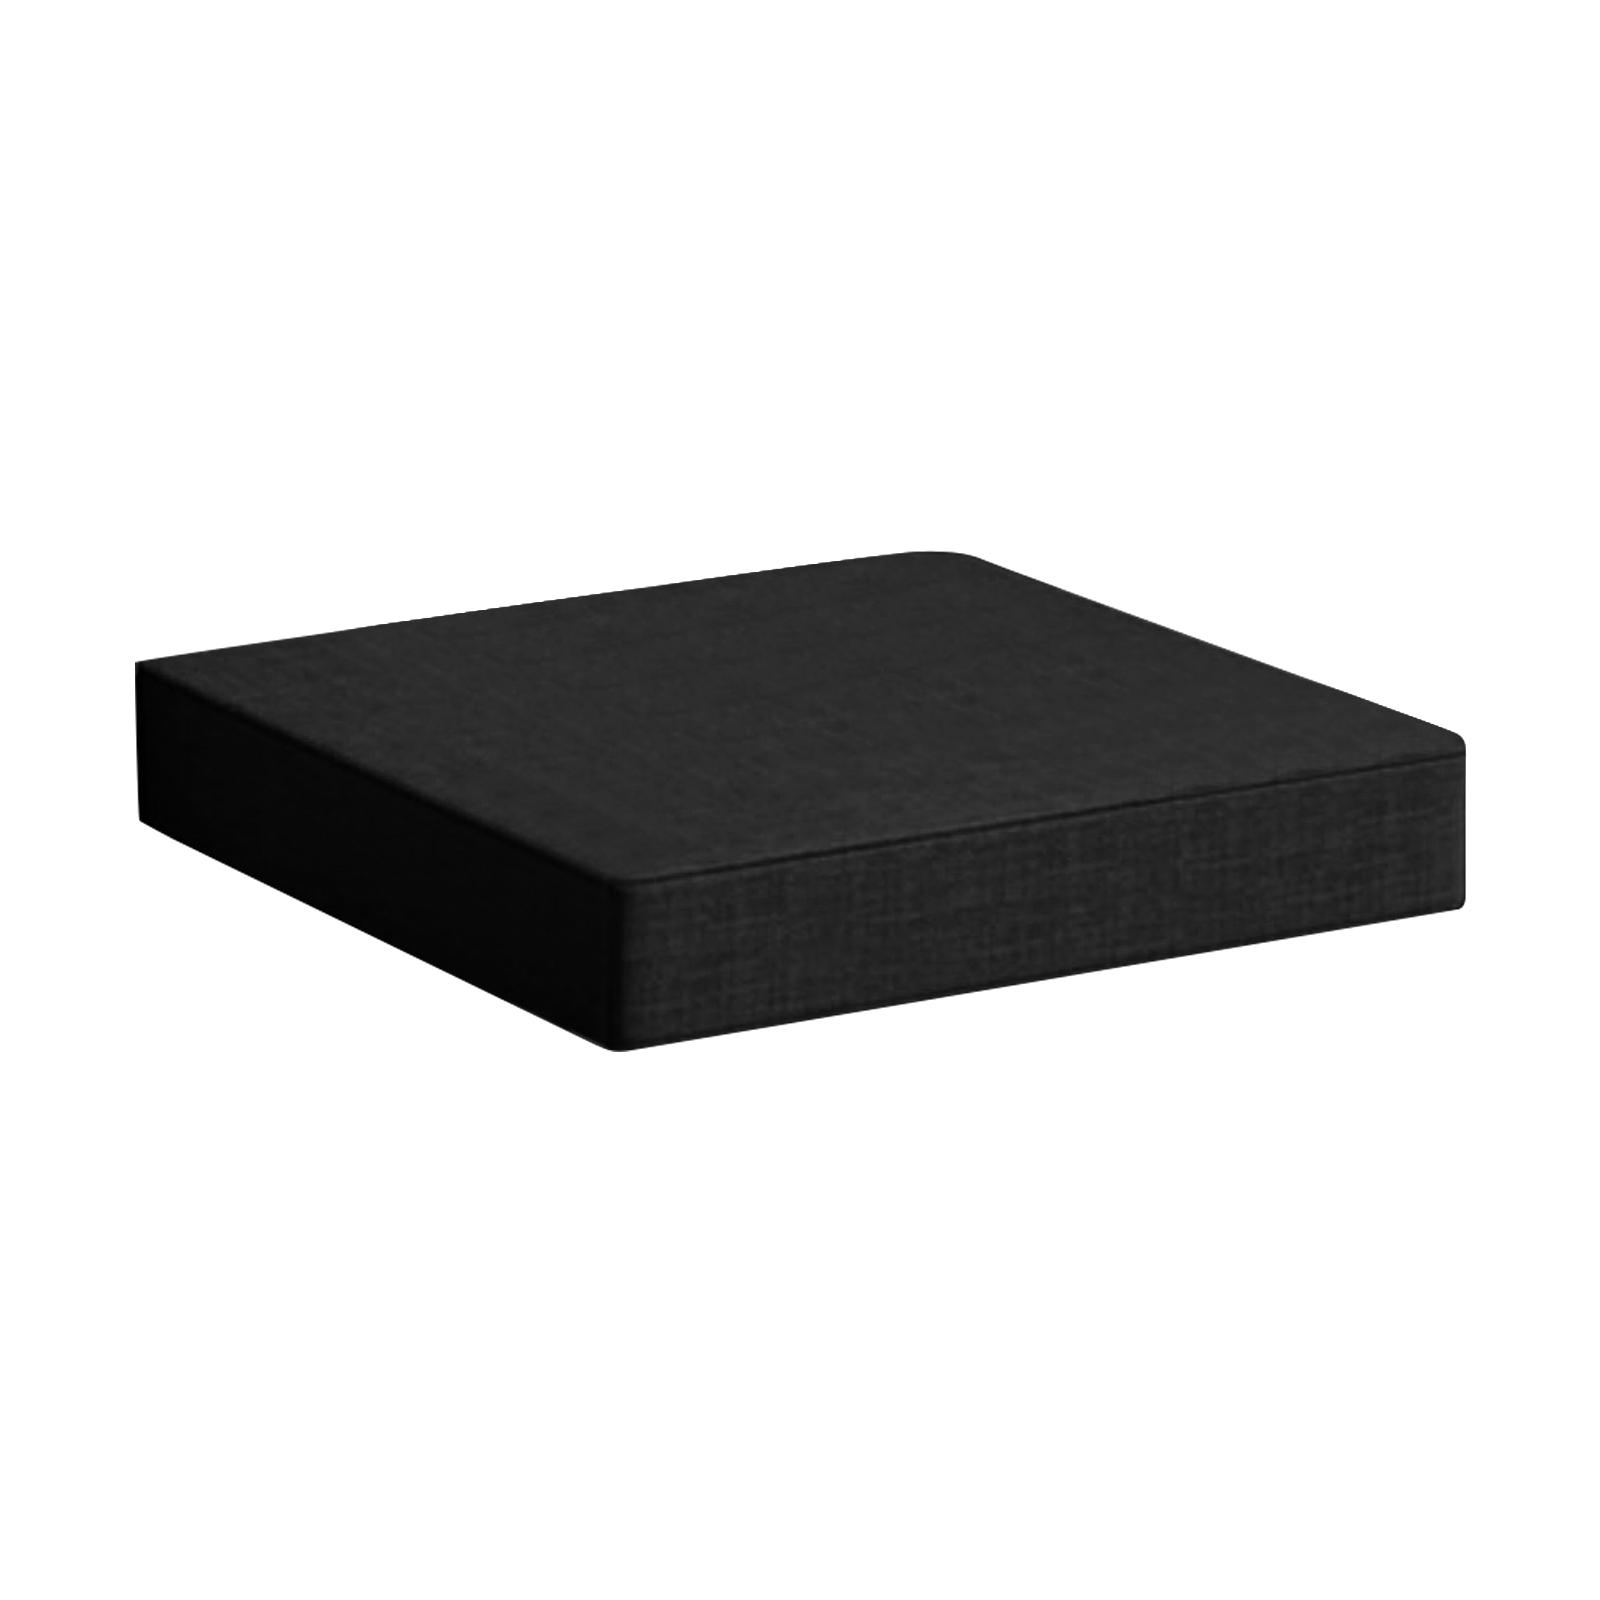 Seat Pads Cushion ,Waterproof Chair Cushions Garden Cushion,Furniture Seat Pads Cushion Pad Indoors Outdoors,Garden Seat Pads Cushion Memory Foam for chairs,Outdoor Office Garden Black - image 1 of 6